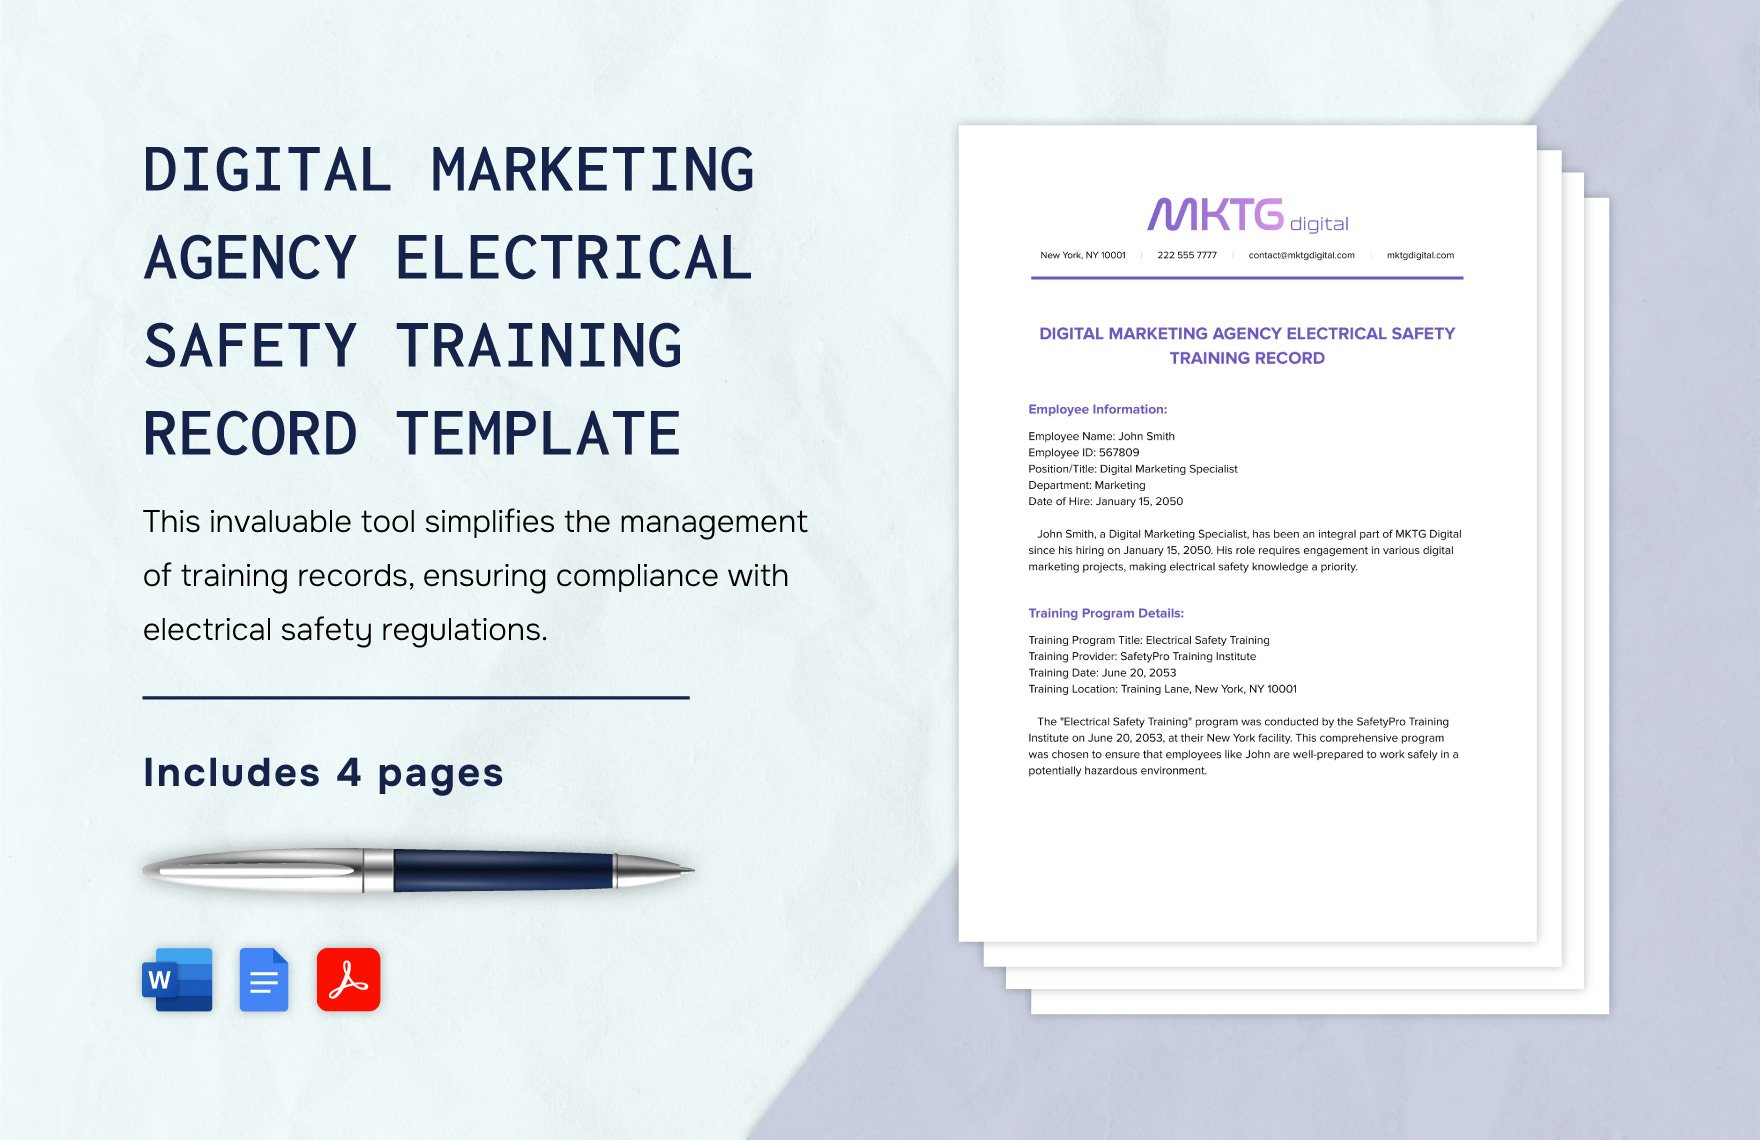 Digital Marketing Agency Electrical Safety Training Record Template